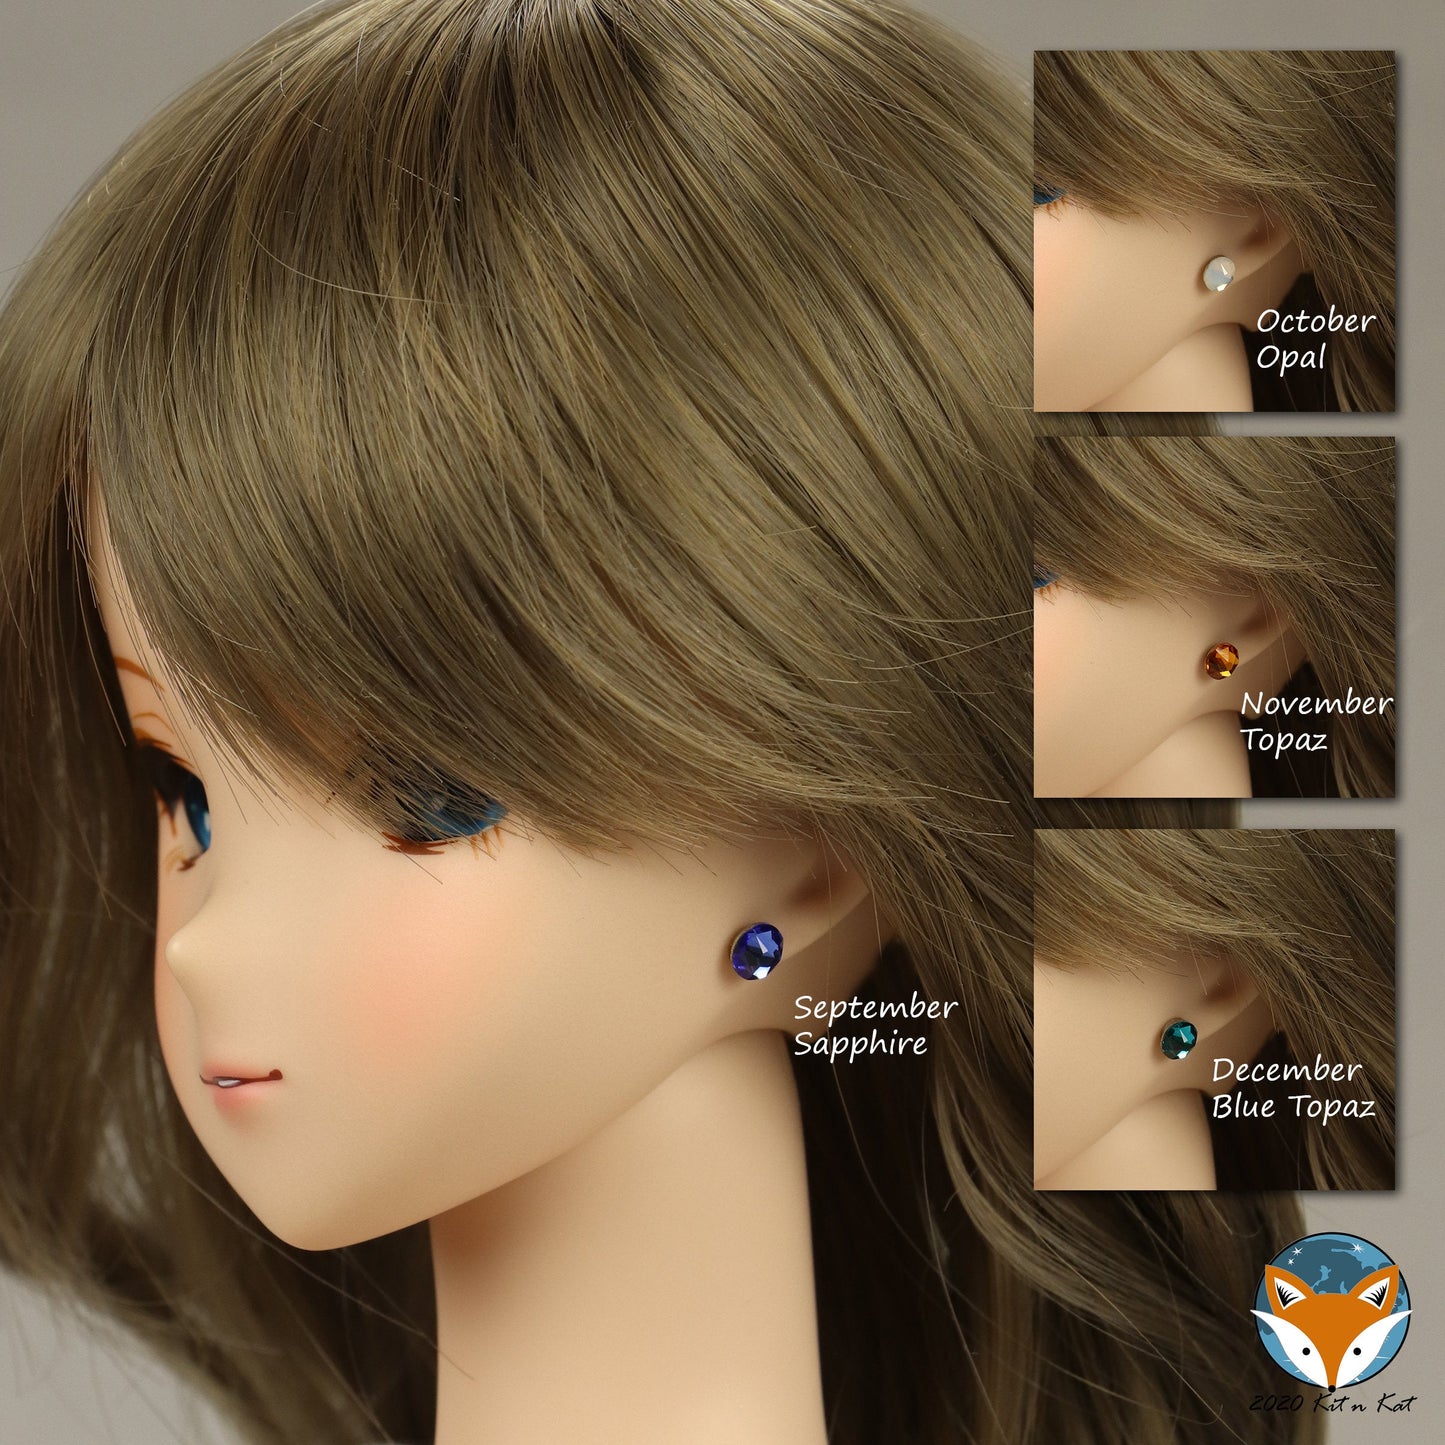 No-Hole CONVERSION Jewelry Kit - Size Medium for Dolls with Pierced Ears